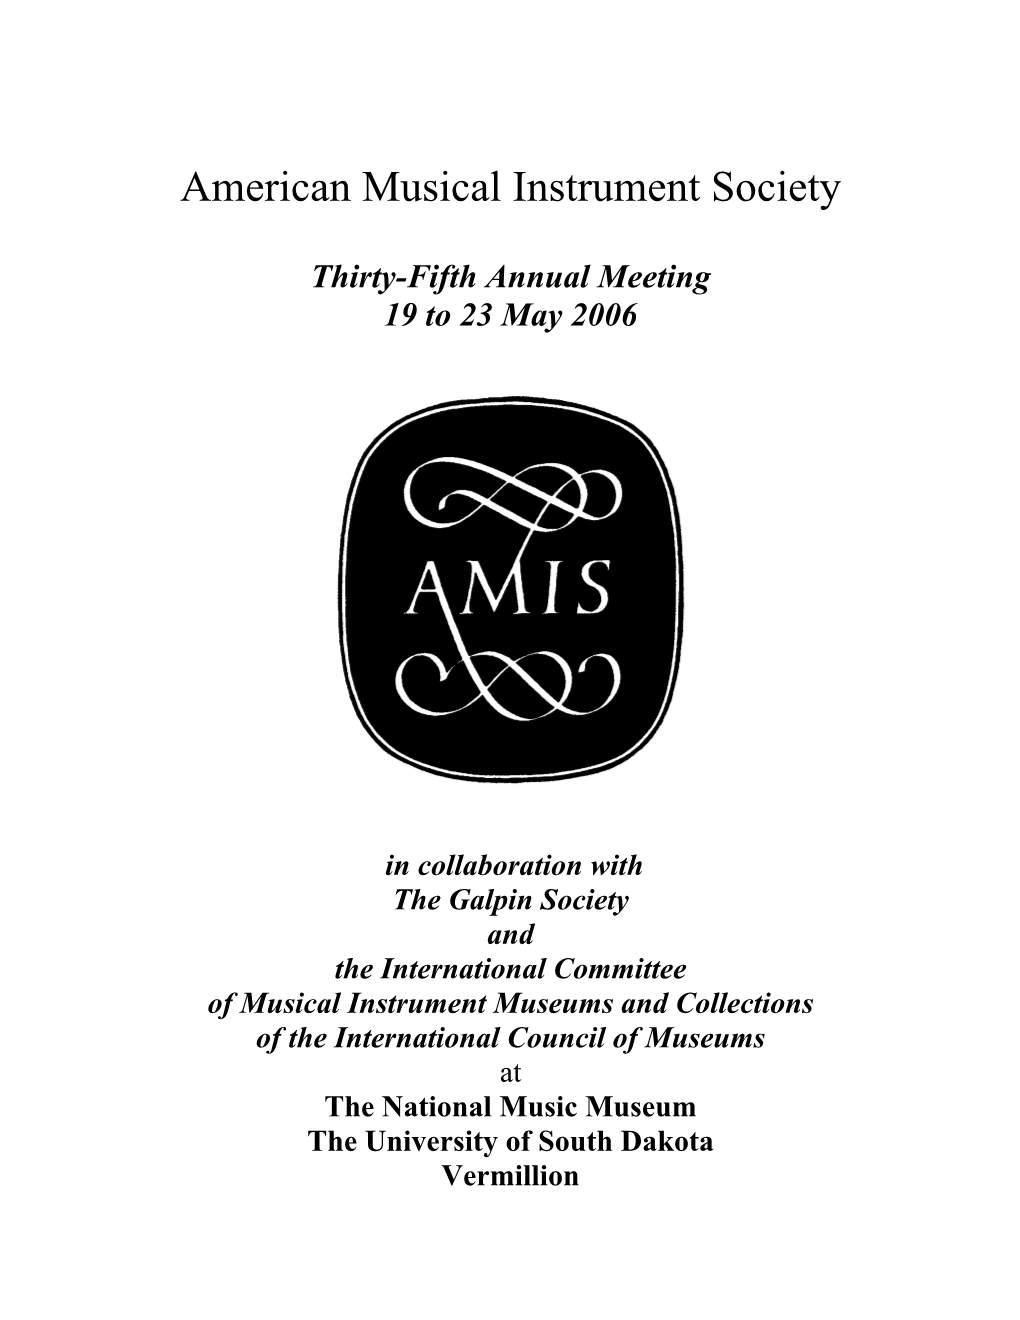 35Th Annual Meeting of the American Musical Instrument Society